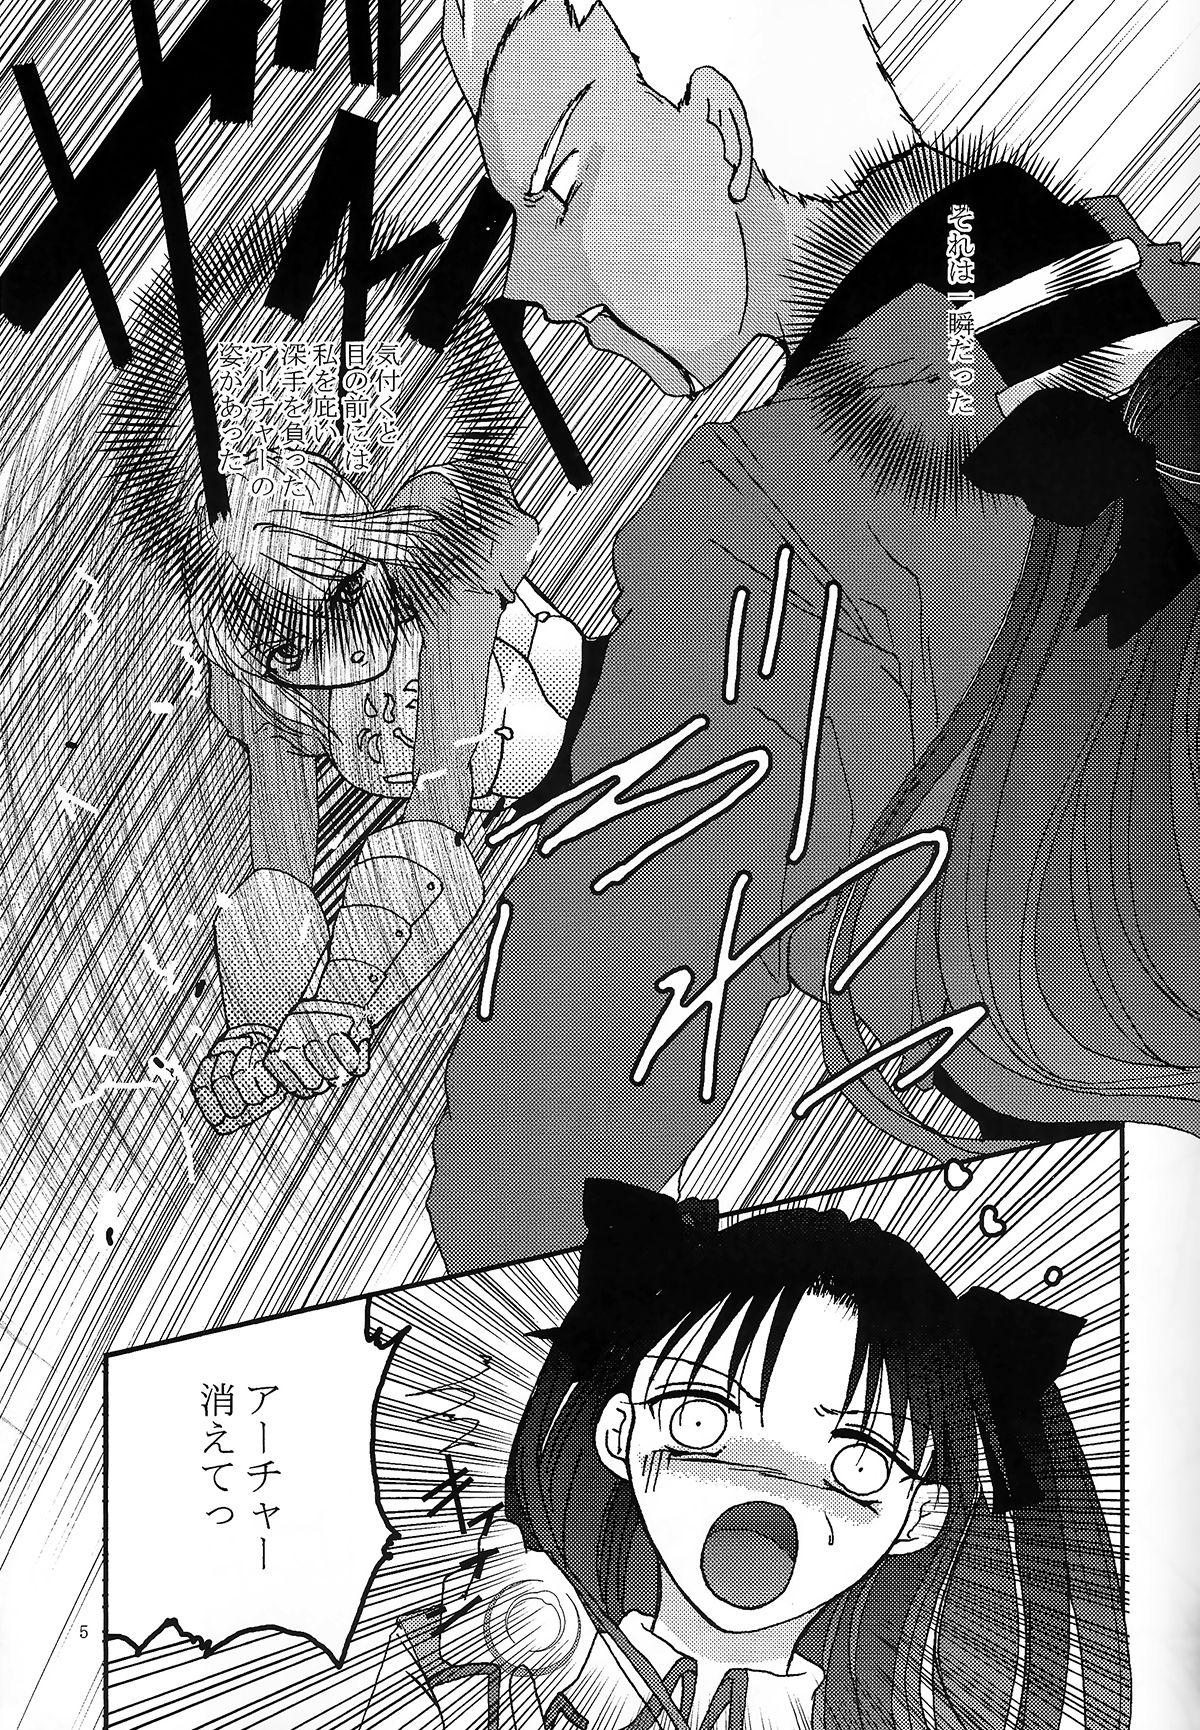 Hot Women Having Sex Question-7 - Fate stay night Satin - Page 3